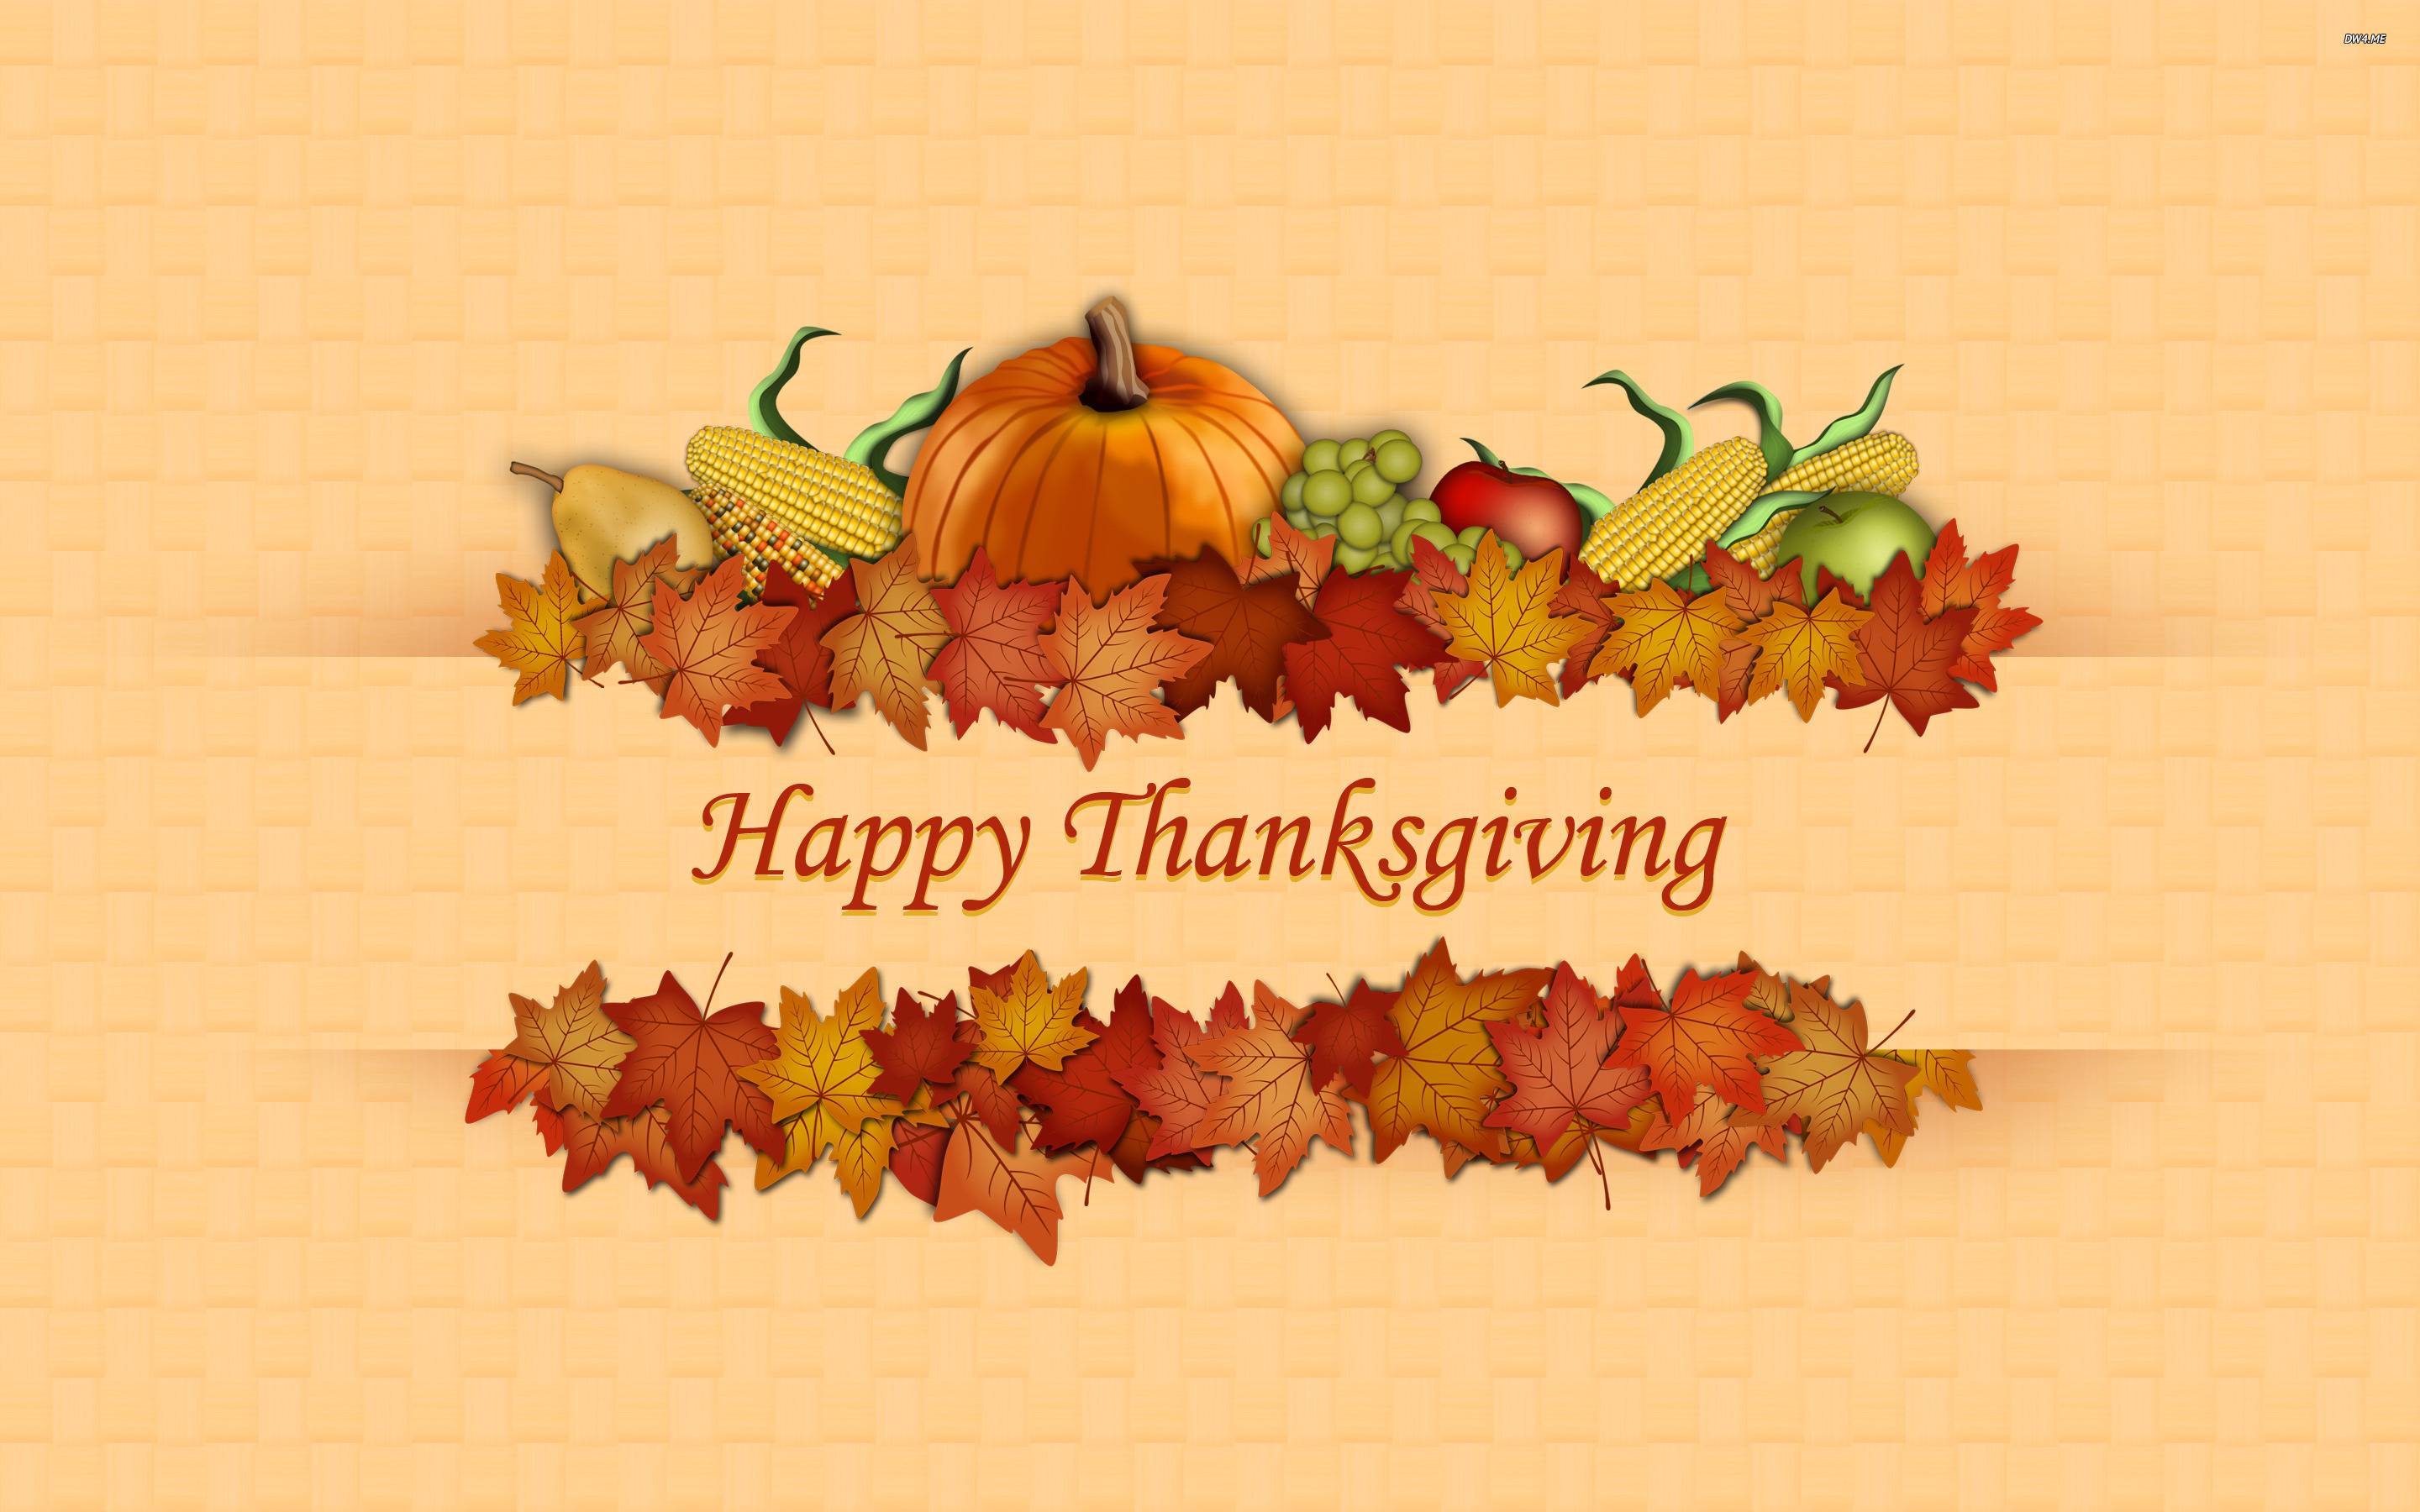 Happy Thanksgiving wallpapers